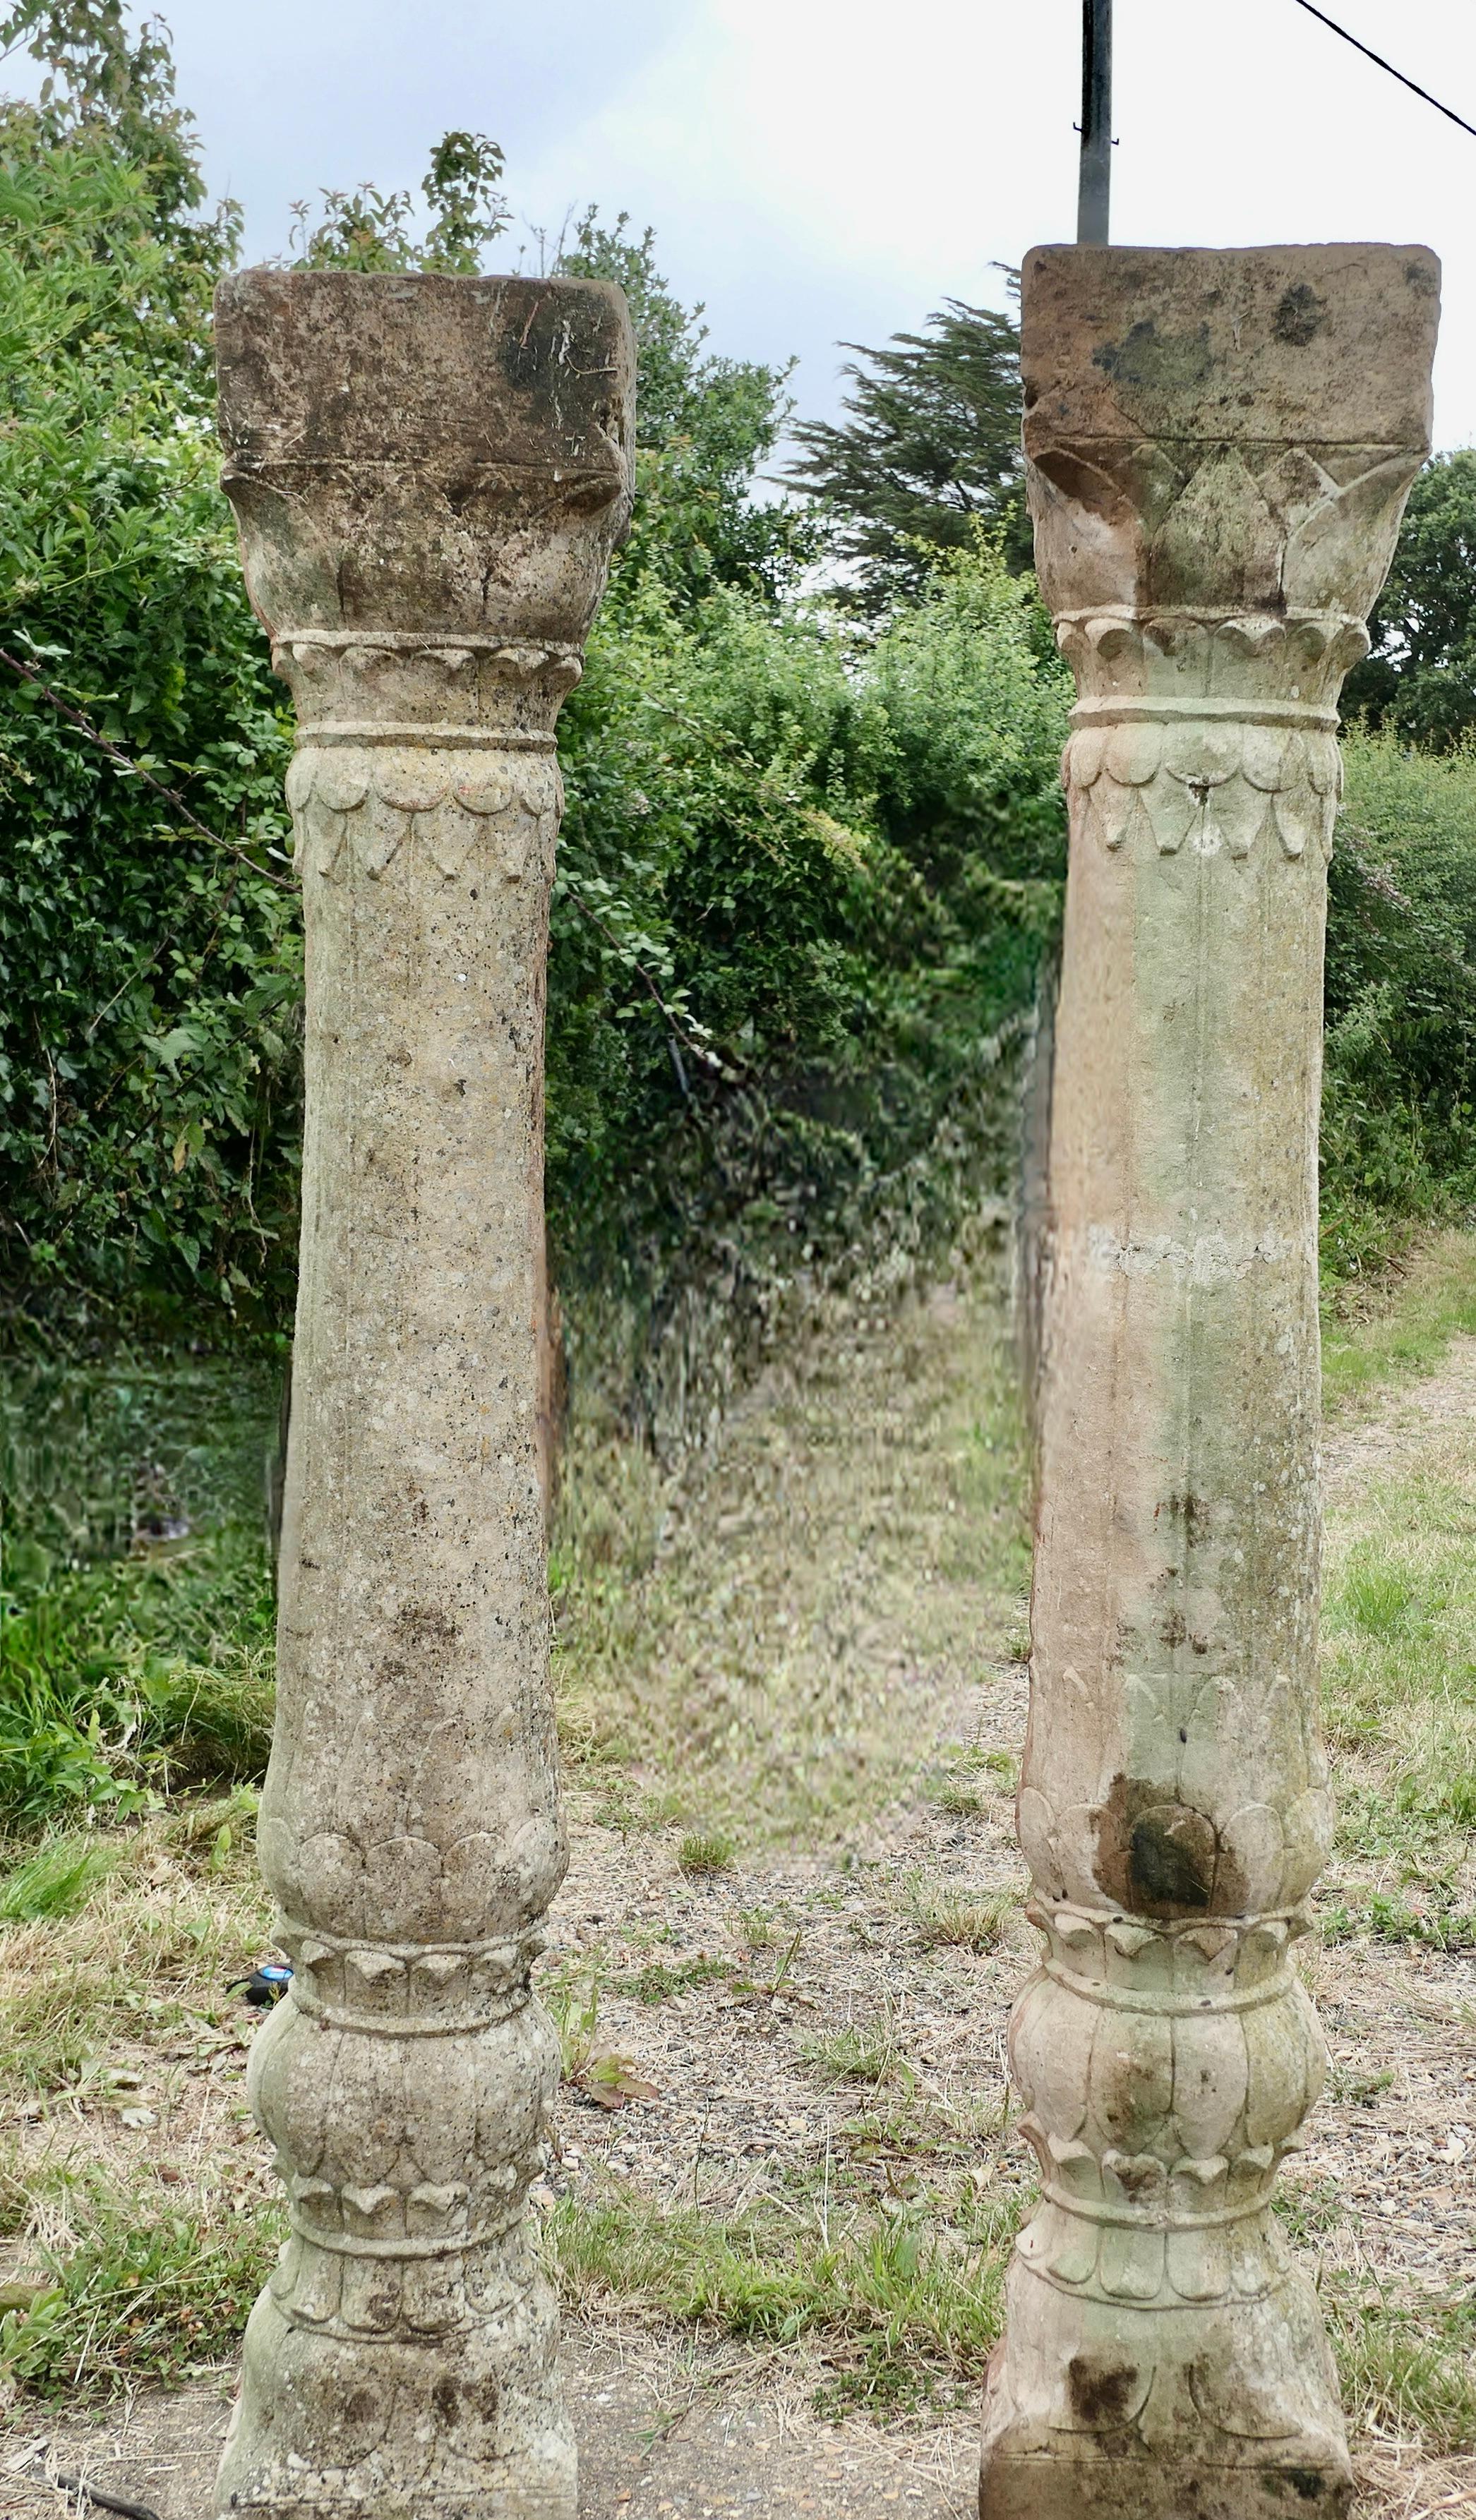 A Pair of Ancient Corinthian Type Stone Columns, 

These are a very heavy pair of Hand Hewn Stone Pillars, they are very well weathered and probably originated from a Portico

The Columns are decorated in a slightly reeded style with leaf shaped